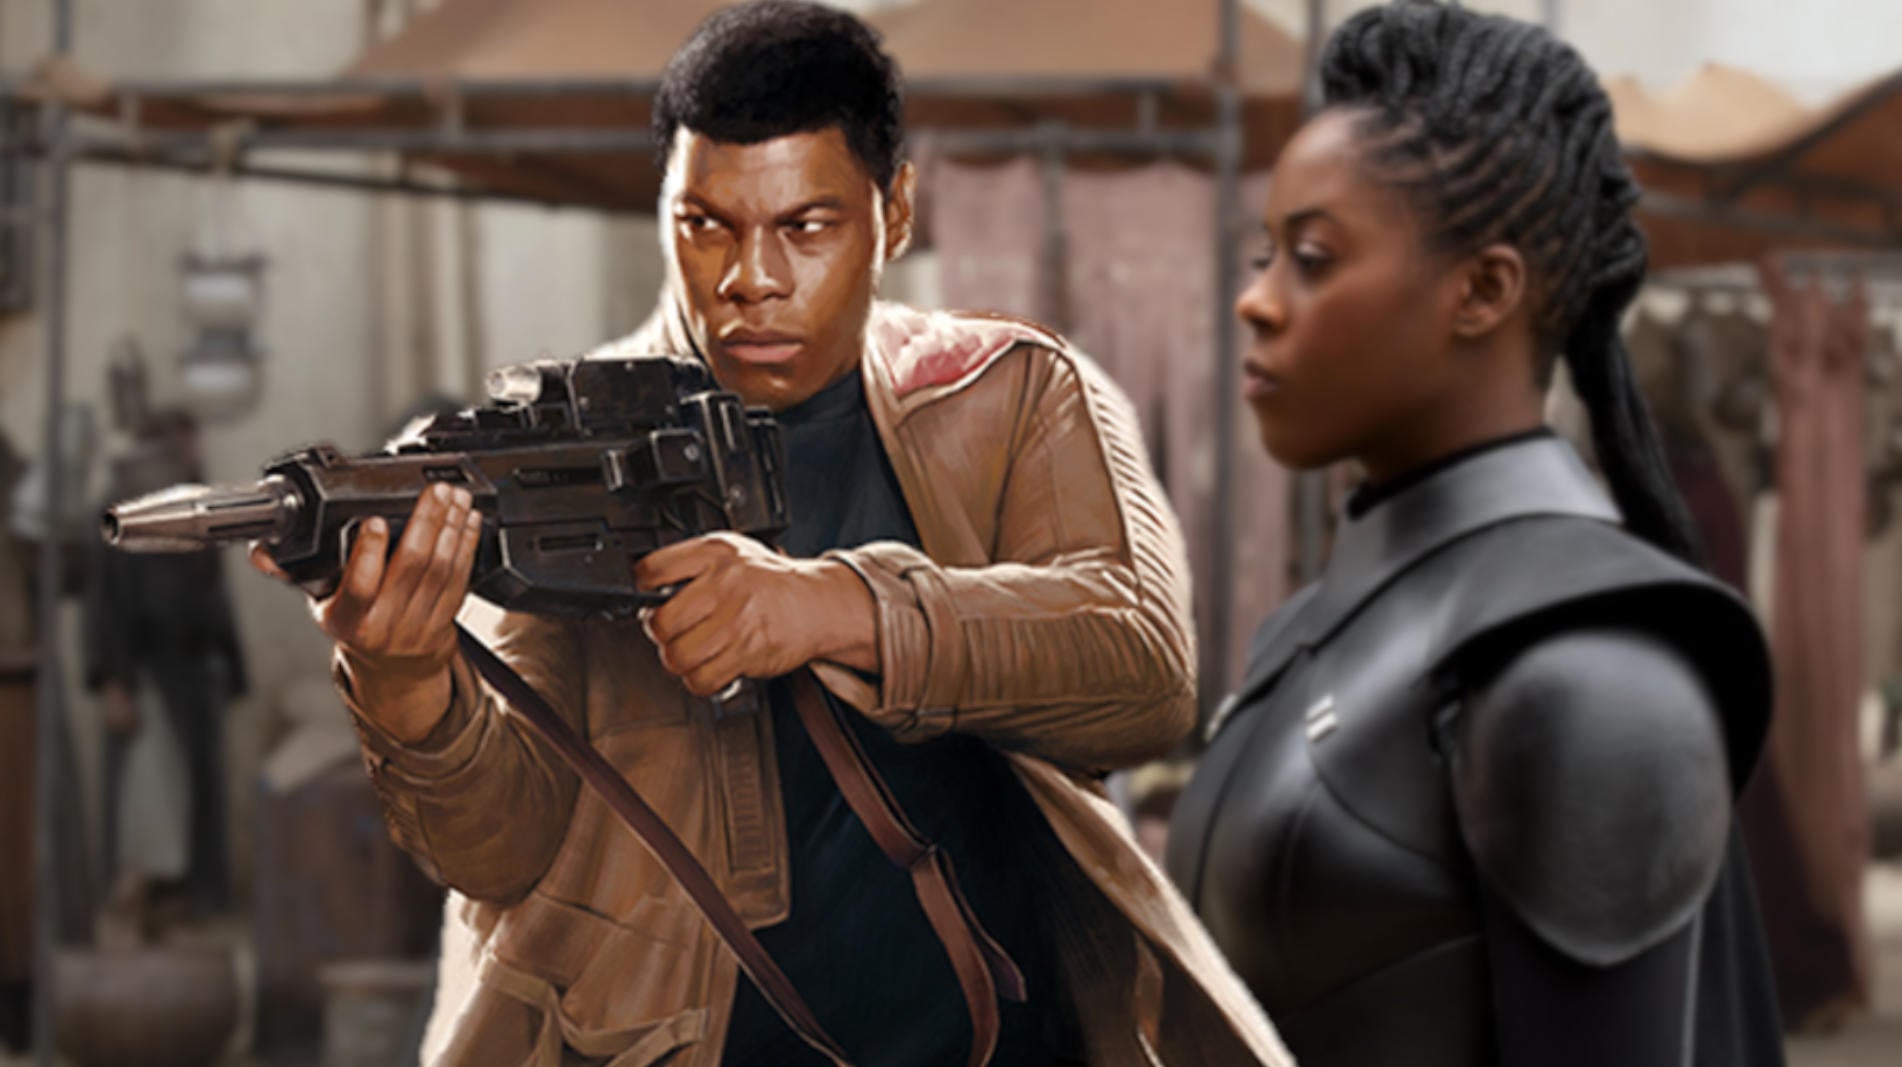 john-boyega-says-star-wars-lucasfilm-supporting-moses-ingram-makes-him-feel-supported